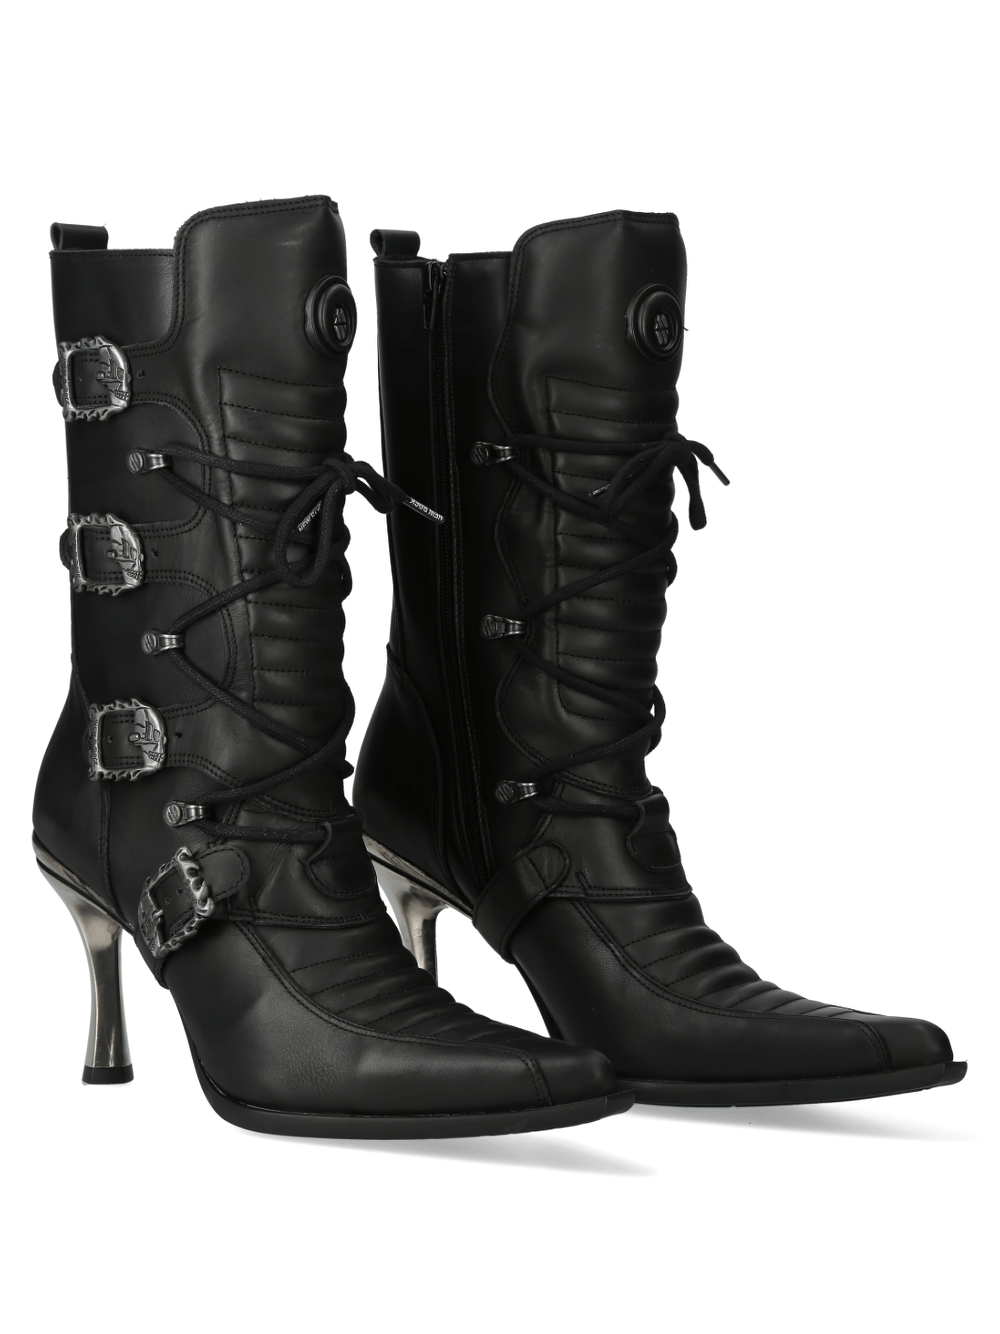 NEW ROCK Urban Gothic High-Heeled Lace-Up Boots